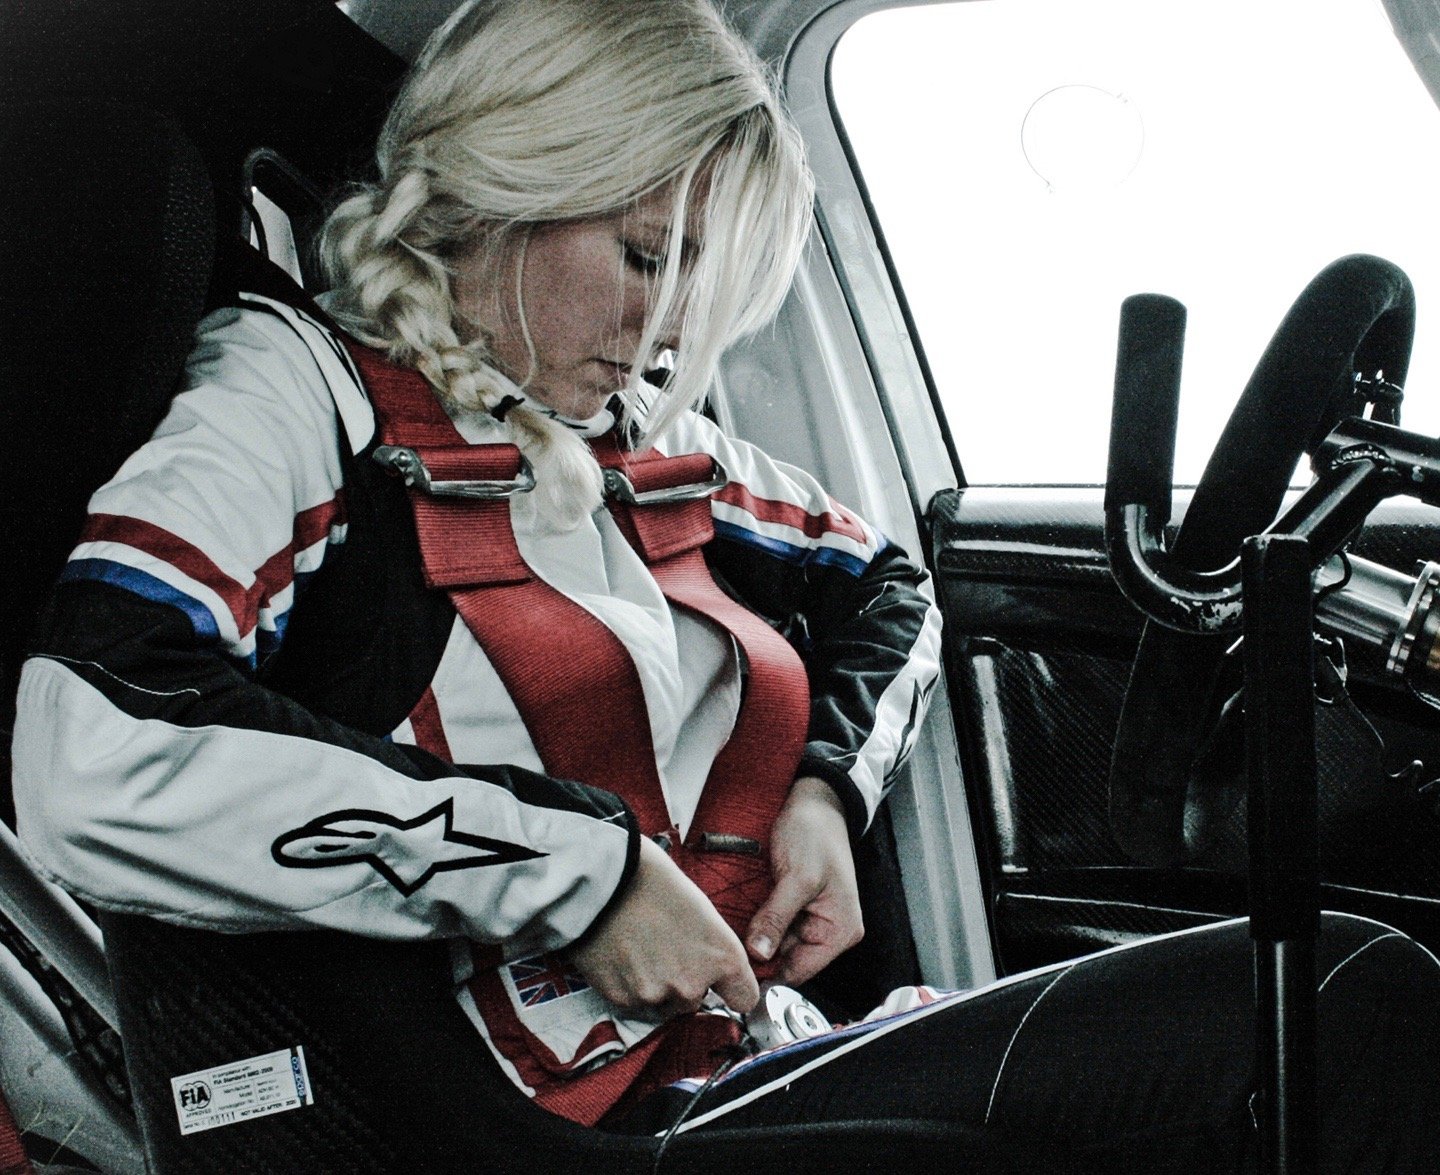 Louise Cook buckles herself into her rally car